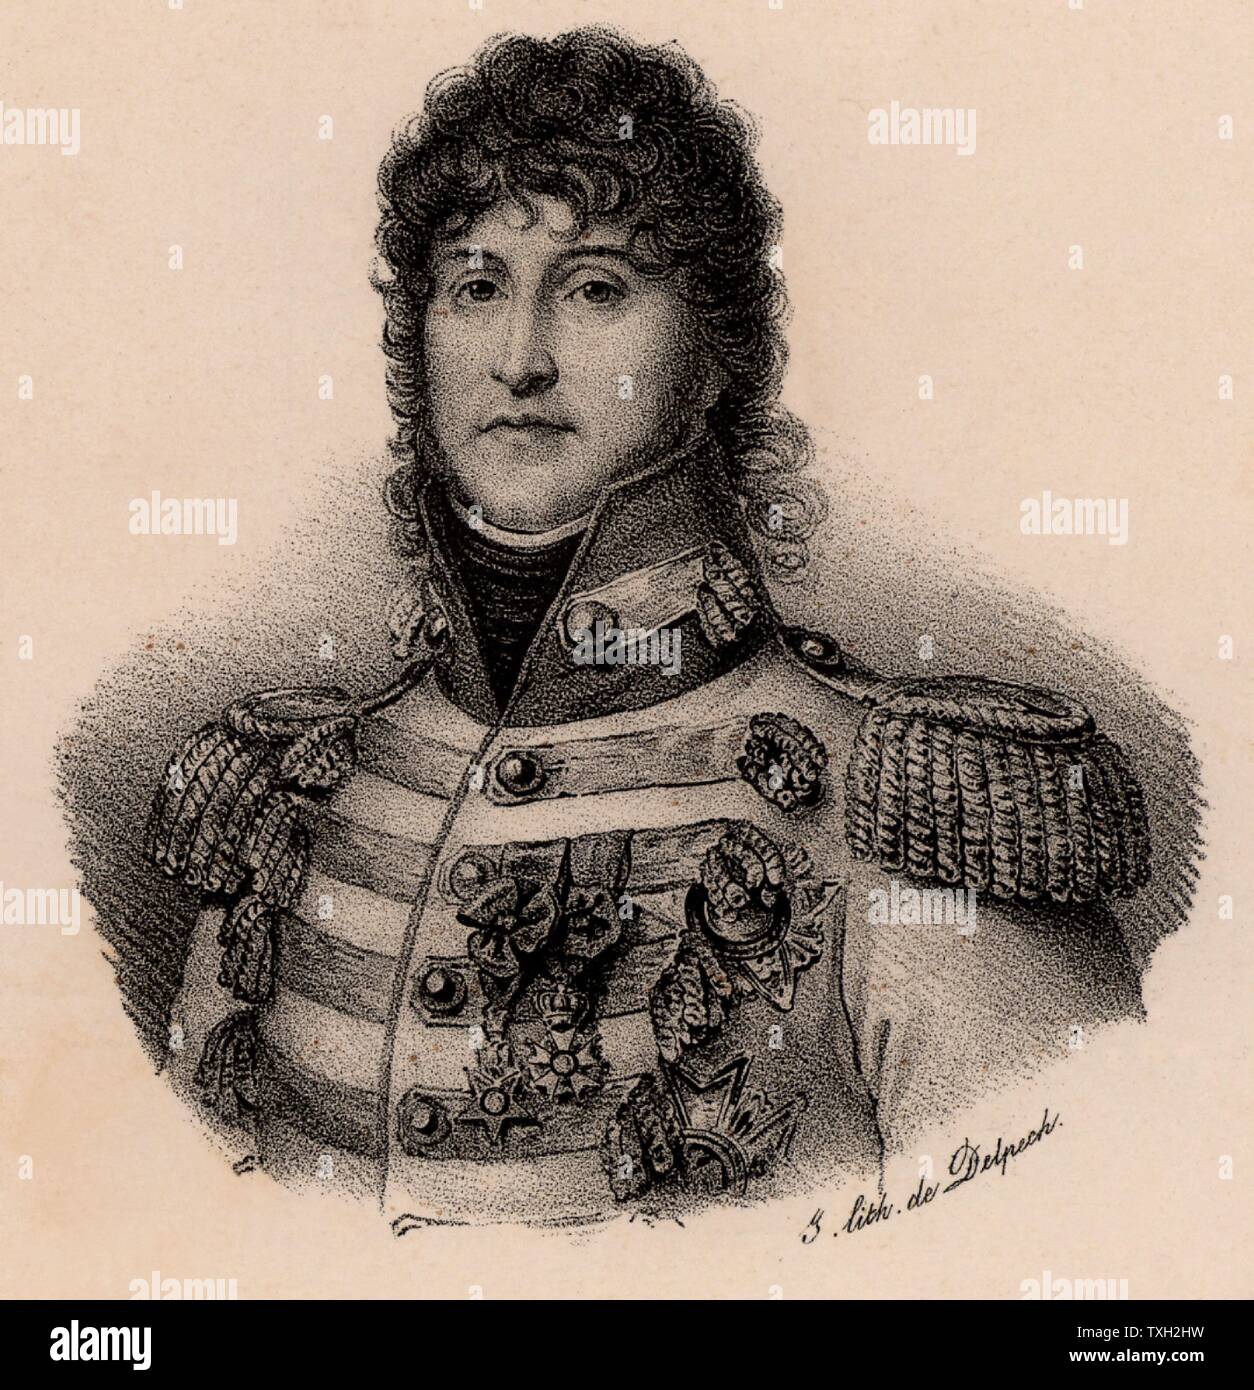 Joachim Murat (1767-1815) French soldier. Created king of Naples in 1808. He married Napoleon Bonaparte's sister Caroline. He contributed to victories at Marengo, Austerlitz, Jena and Eylau. After Napoleon's final defeat, he was court-martialled and shot.  Lithograph c1830. Stock Photo